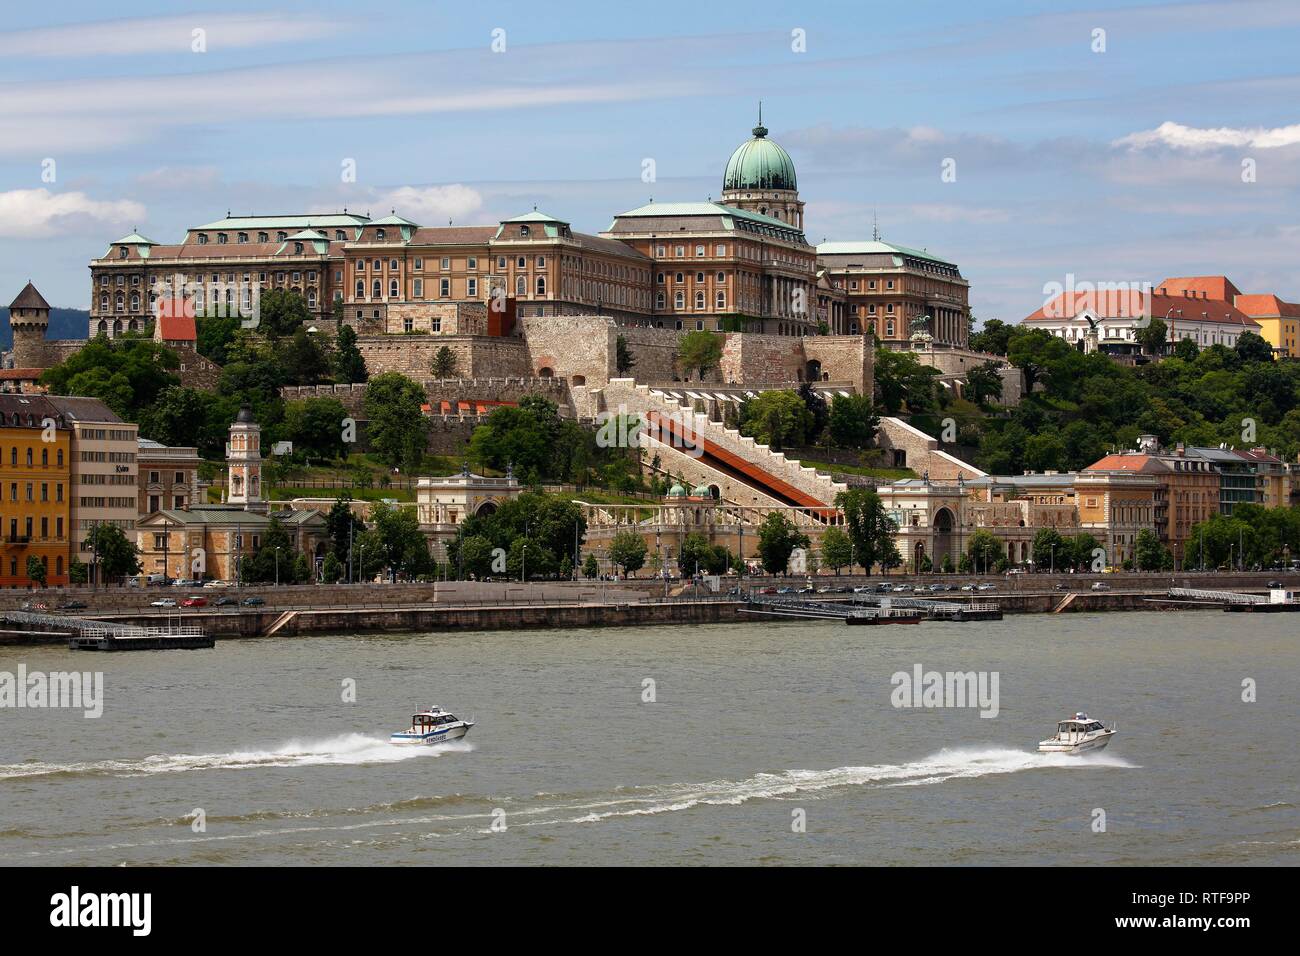 Castle palace at the Danube seen from the Pest district, Castle quarter, Budapest, Hungary Stock Photo